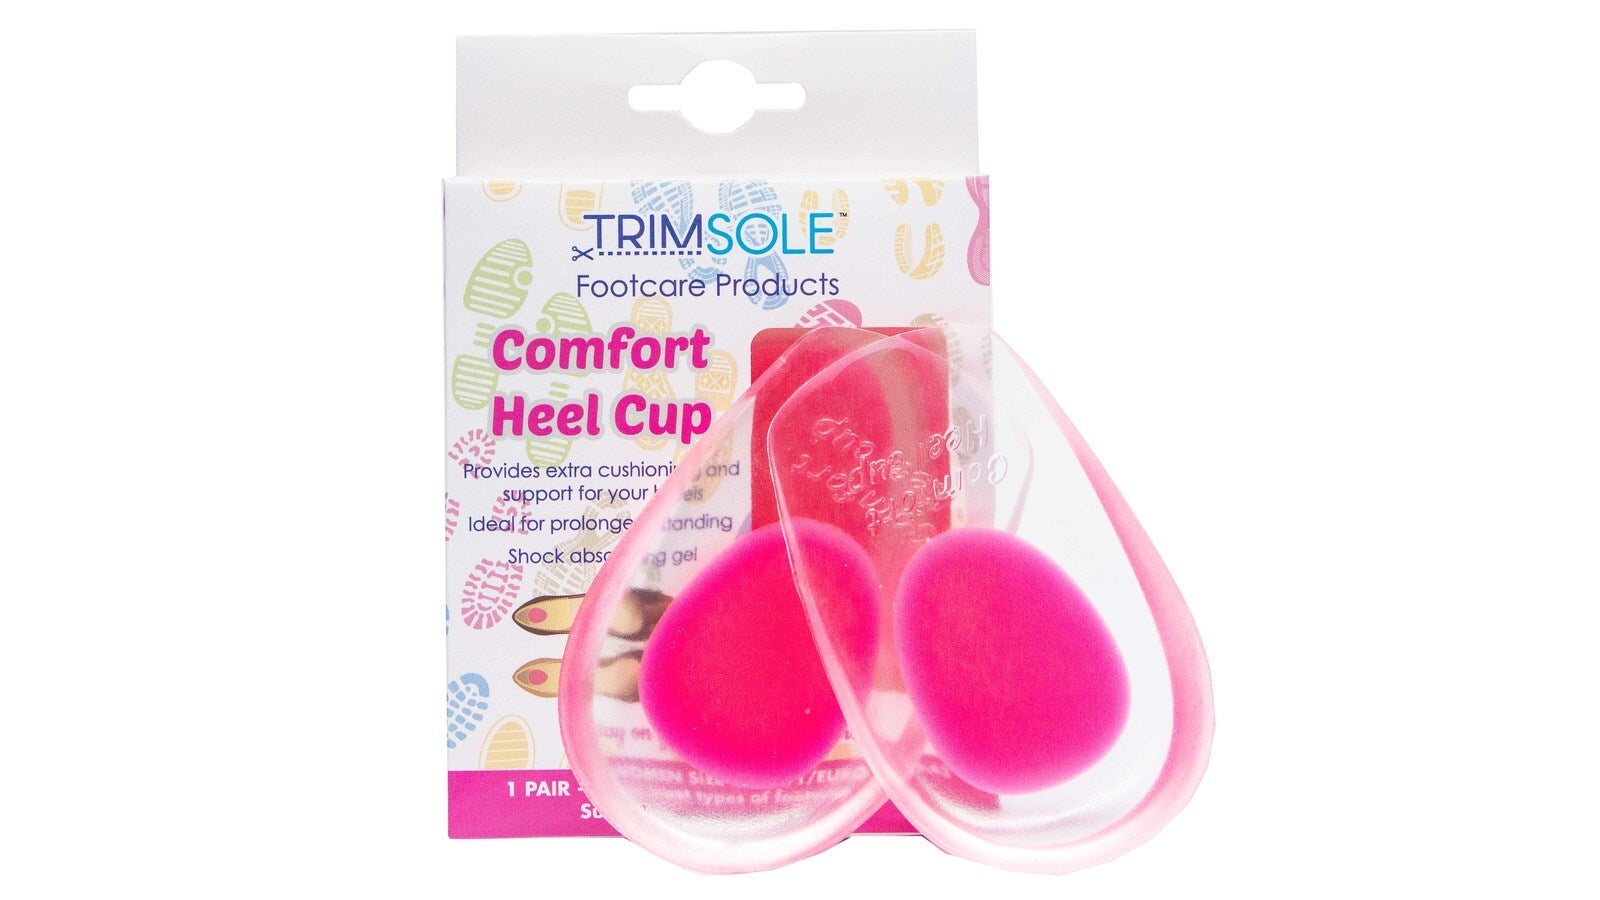 TRIMSOLE Womens Comfort Heel Cup Silicone Gel Pad Cushion Insoles Inserts (1 Pair)